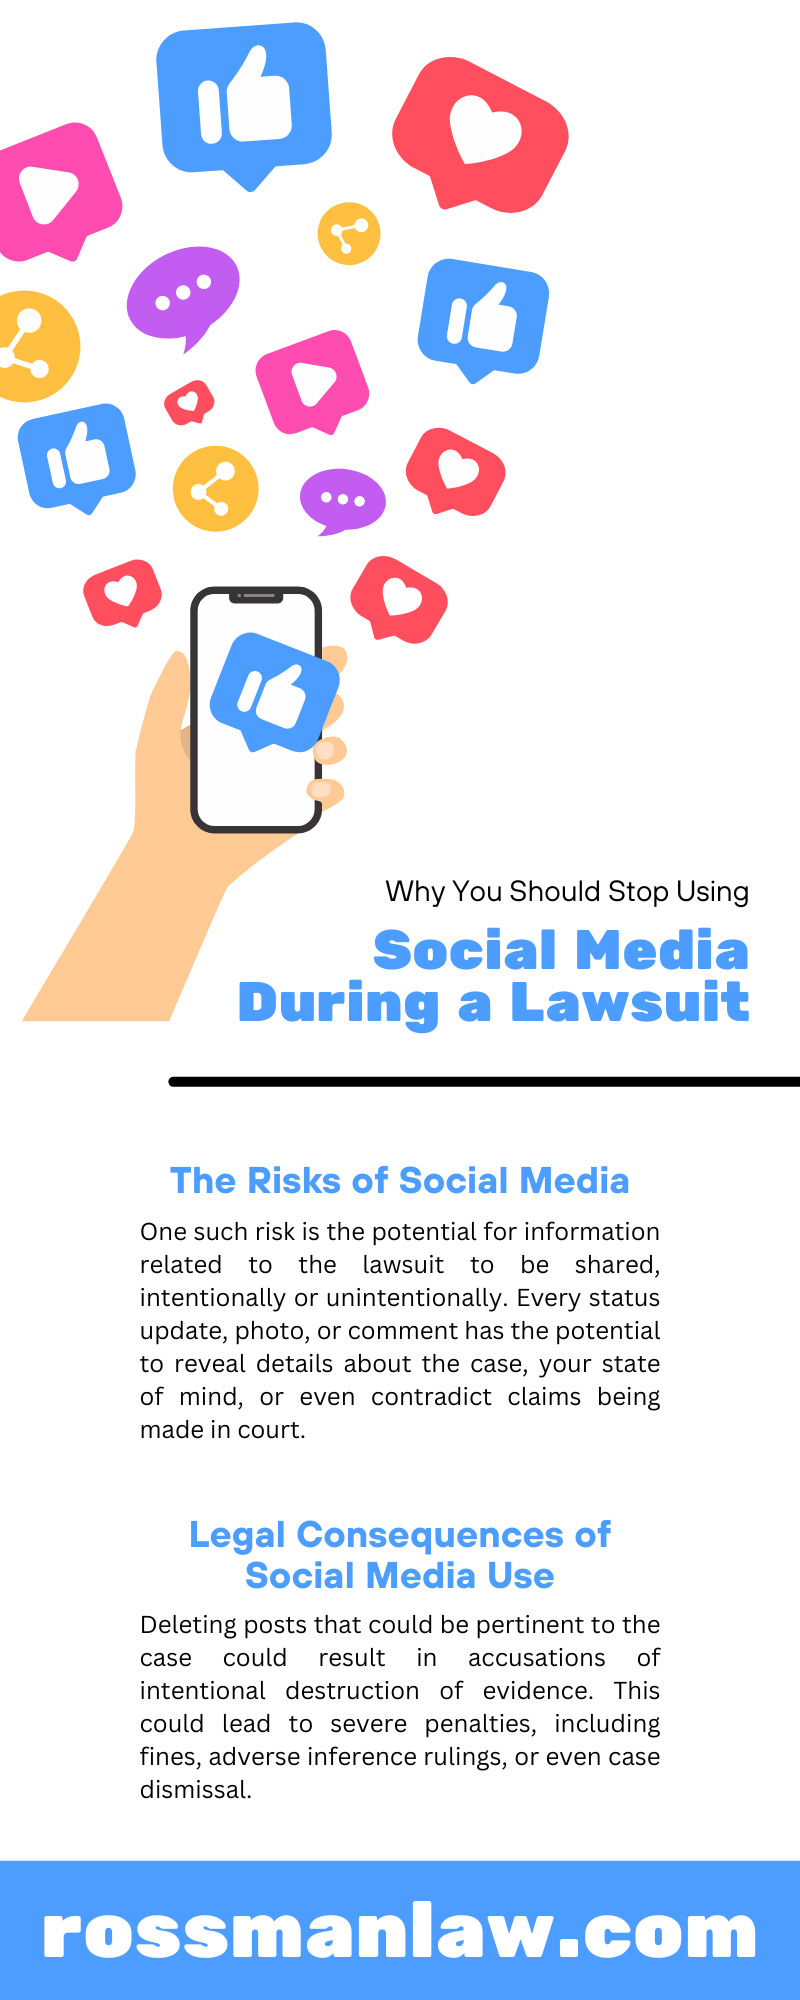 Why You Should Stop Using Social Media During a Lawsuit 